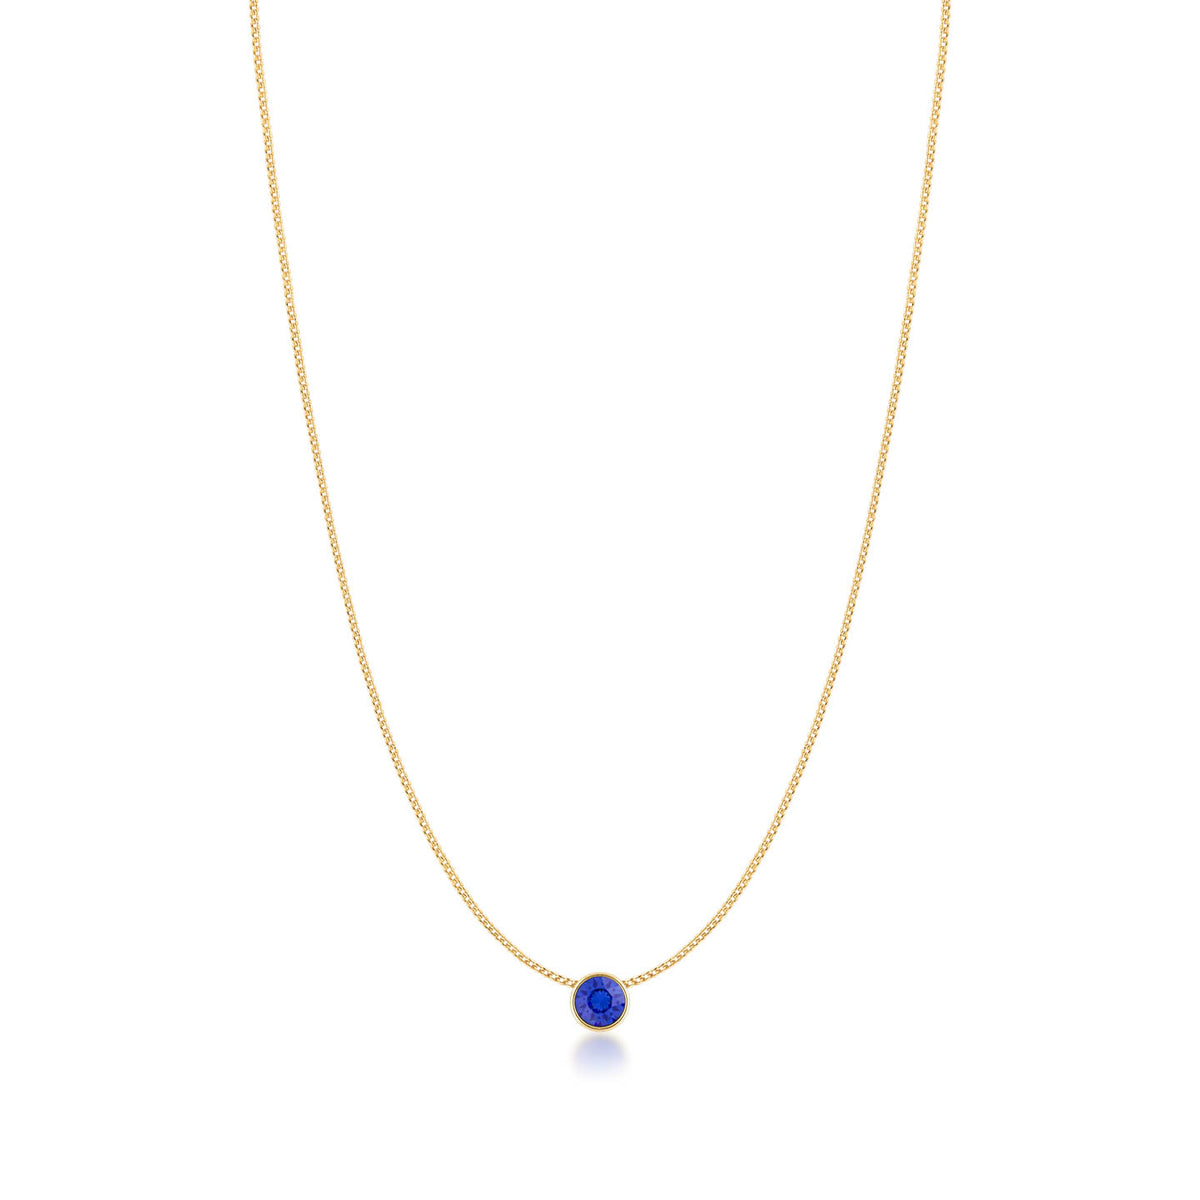 Harley Small Pendant Necklace with Blue Sapphire Round Crystals from Swarovski Gold Plated - Ed Heart